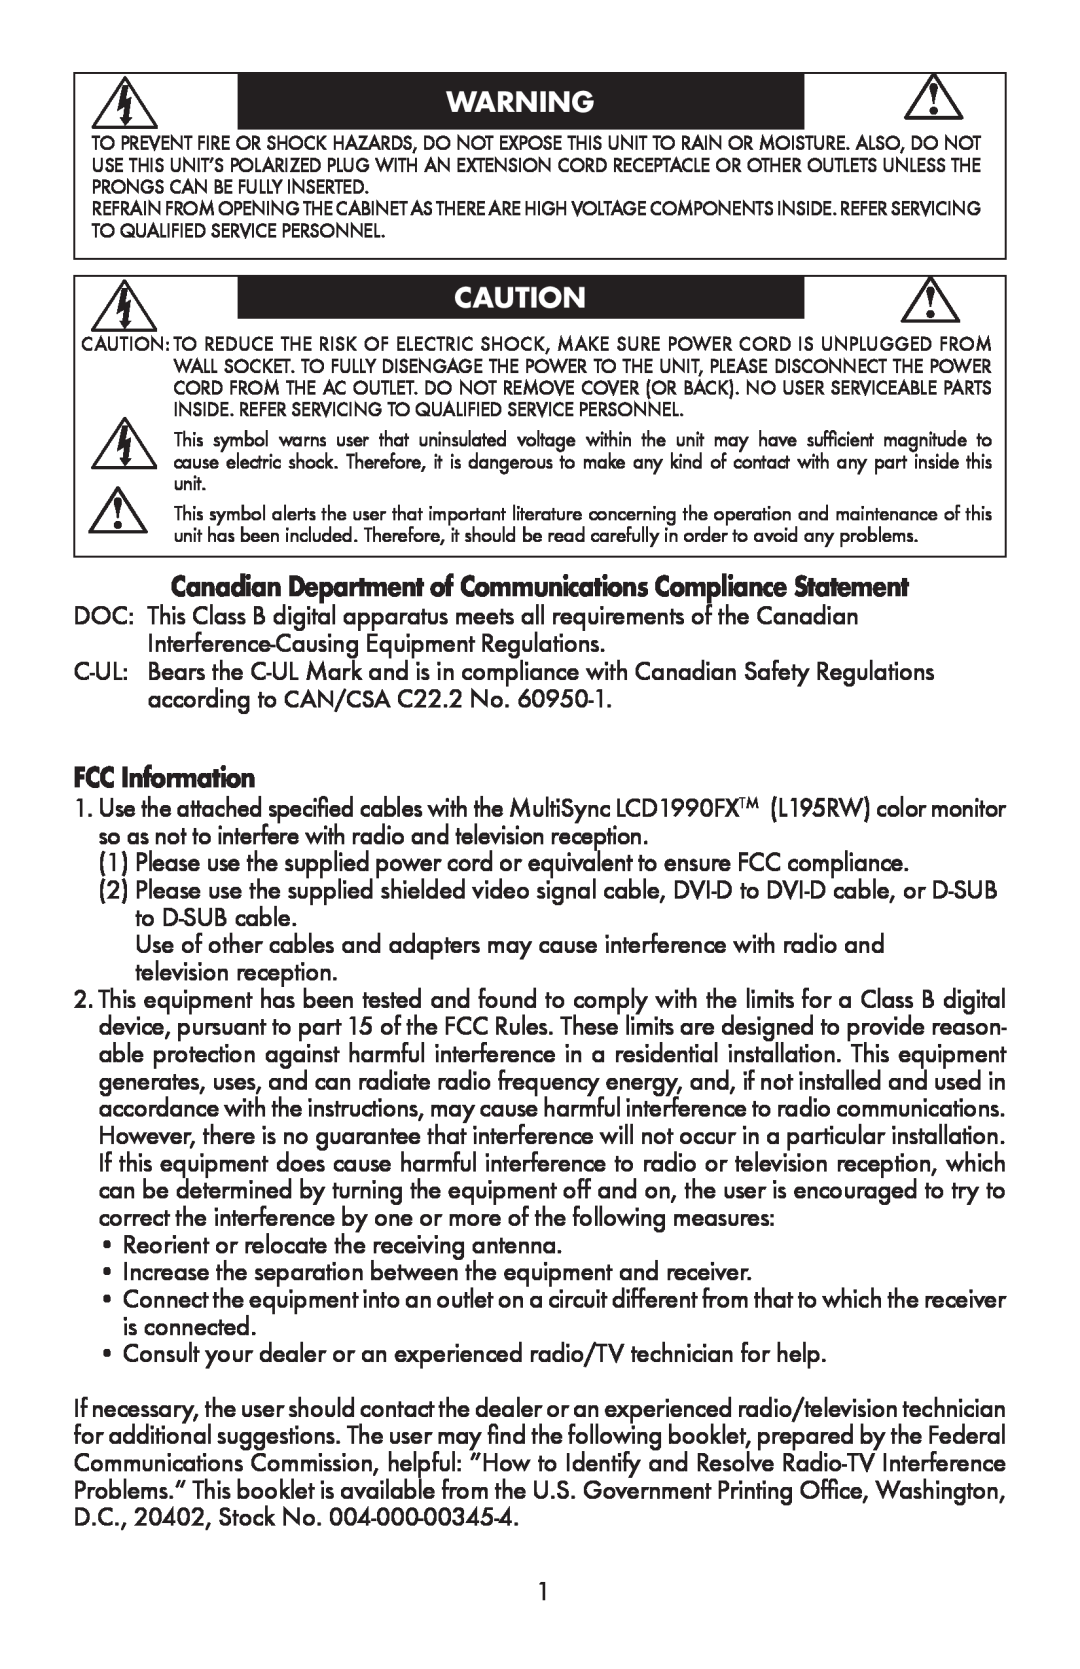 NEC LCD1990FXTM user manual Canadian Department of Communications Compliance Statement, FCC Information 